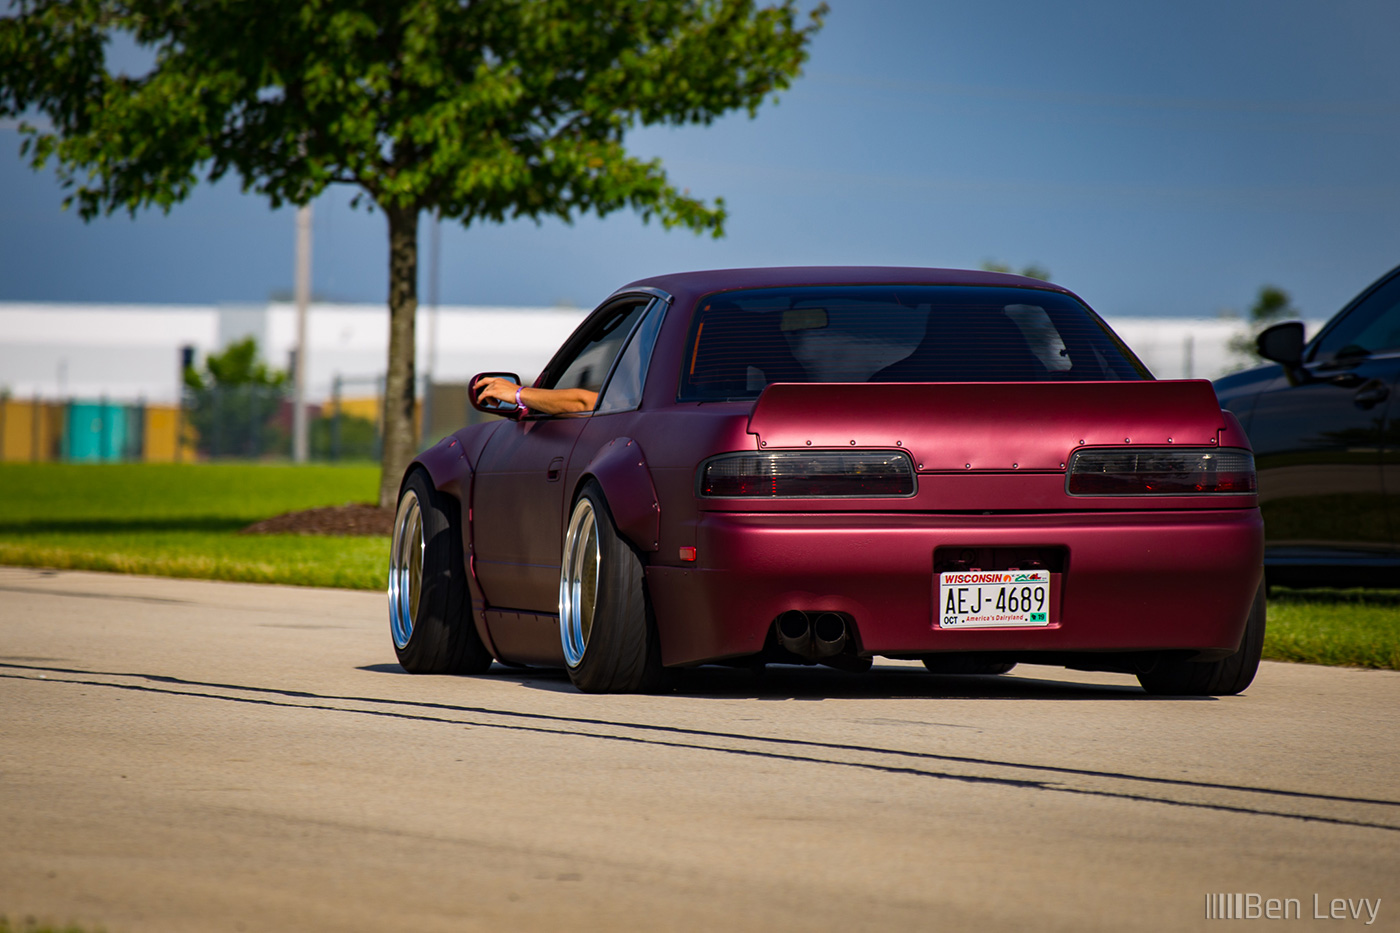 Widebody S13 coupe